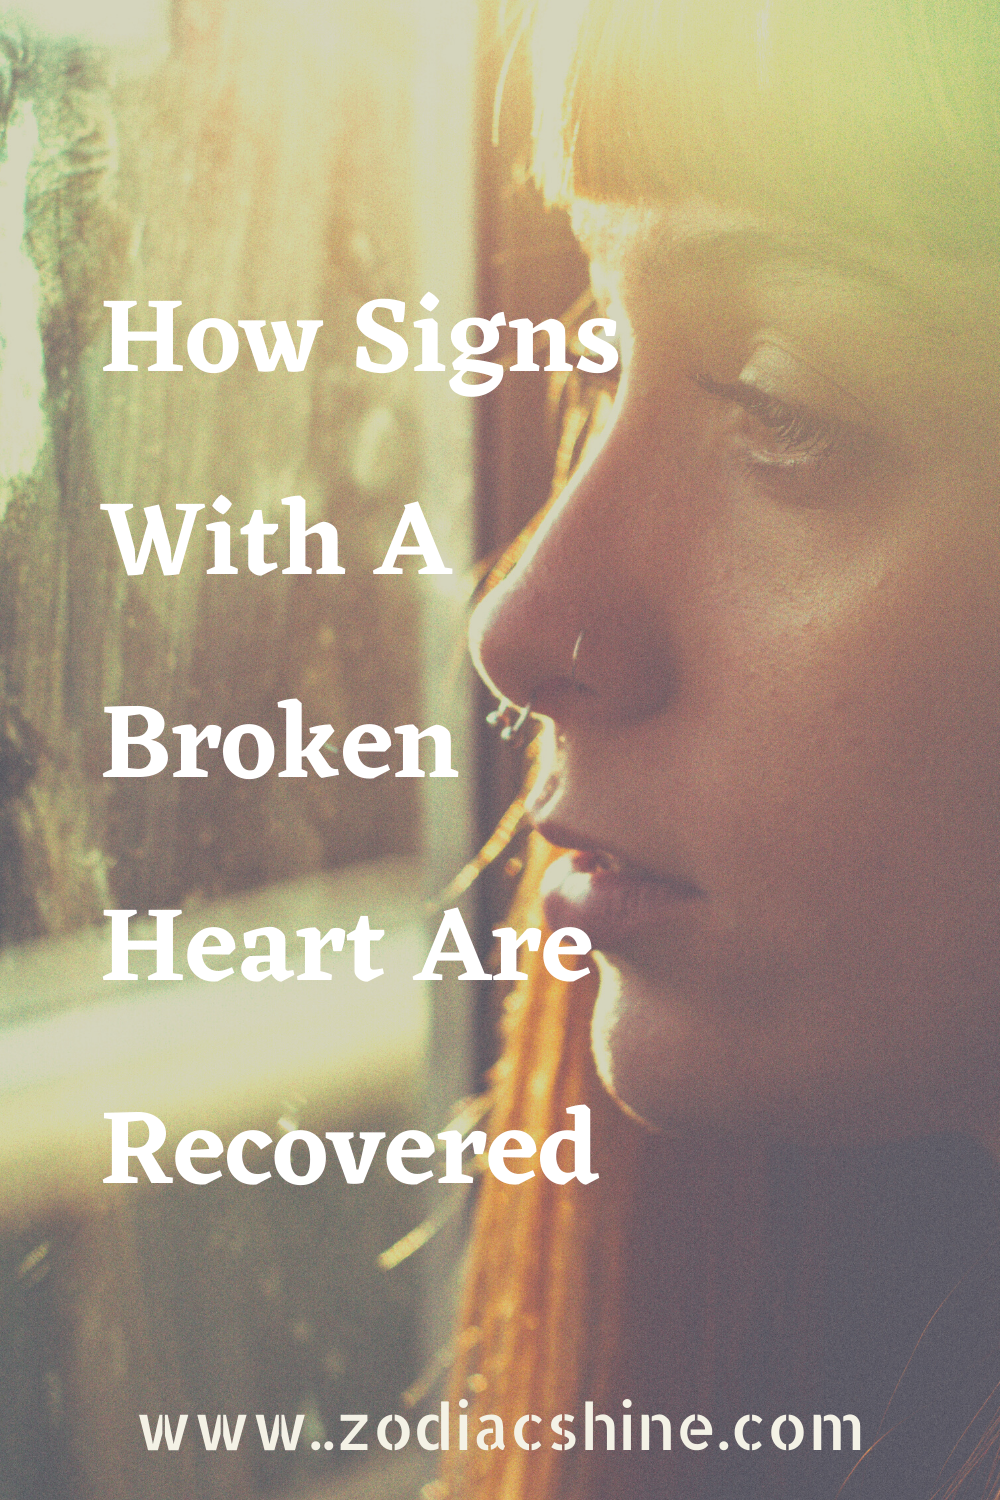 How Signs With A Broken Heart Are Recovered